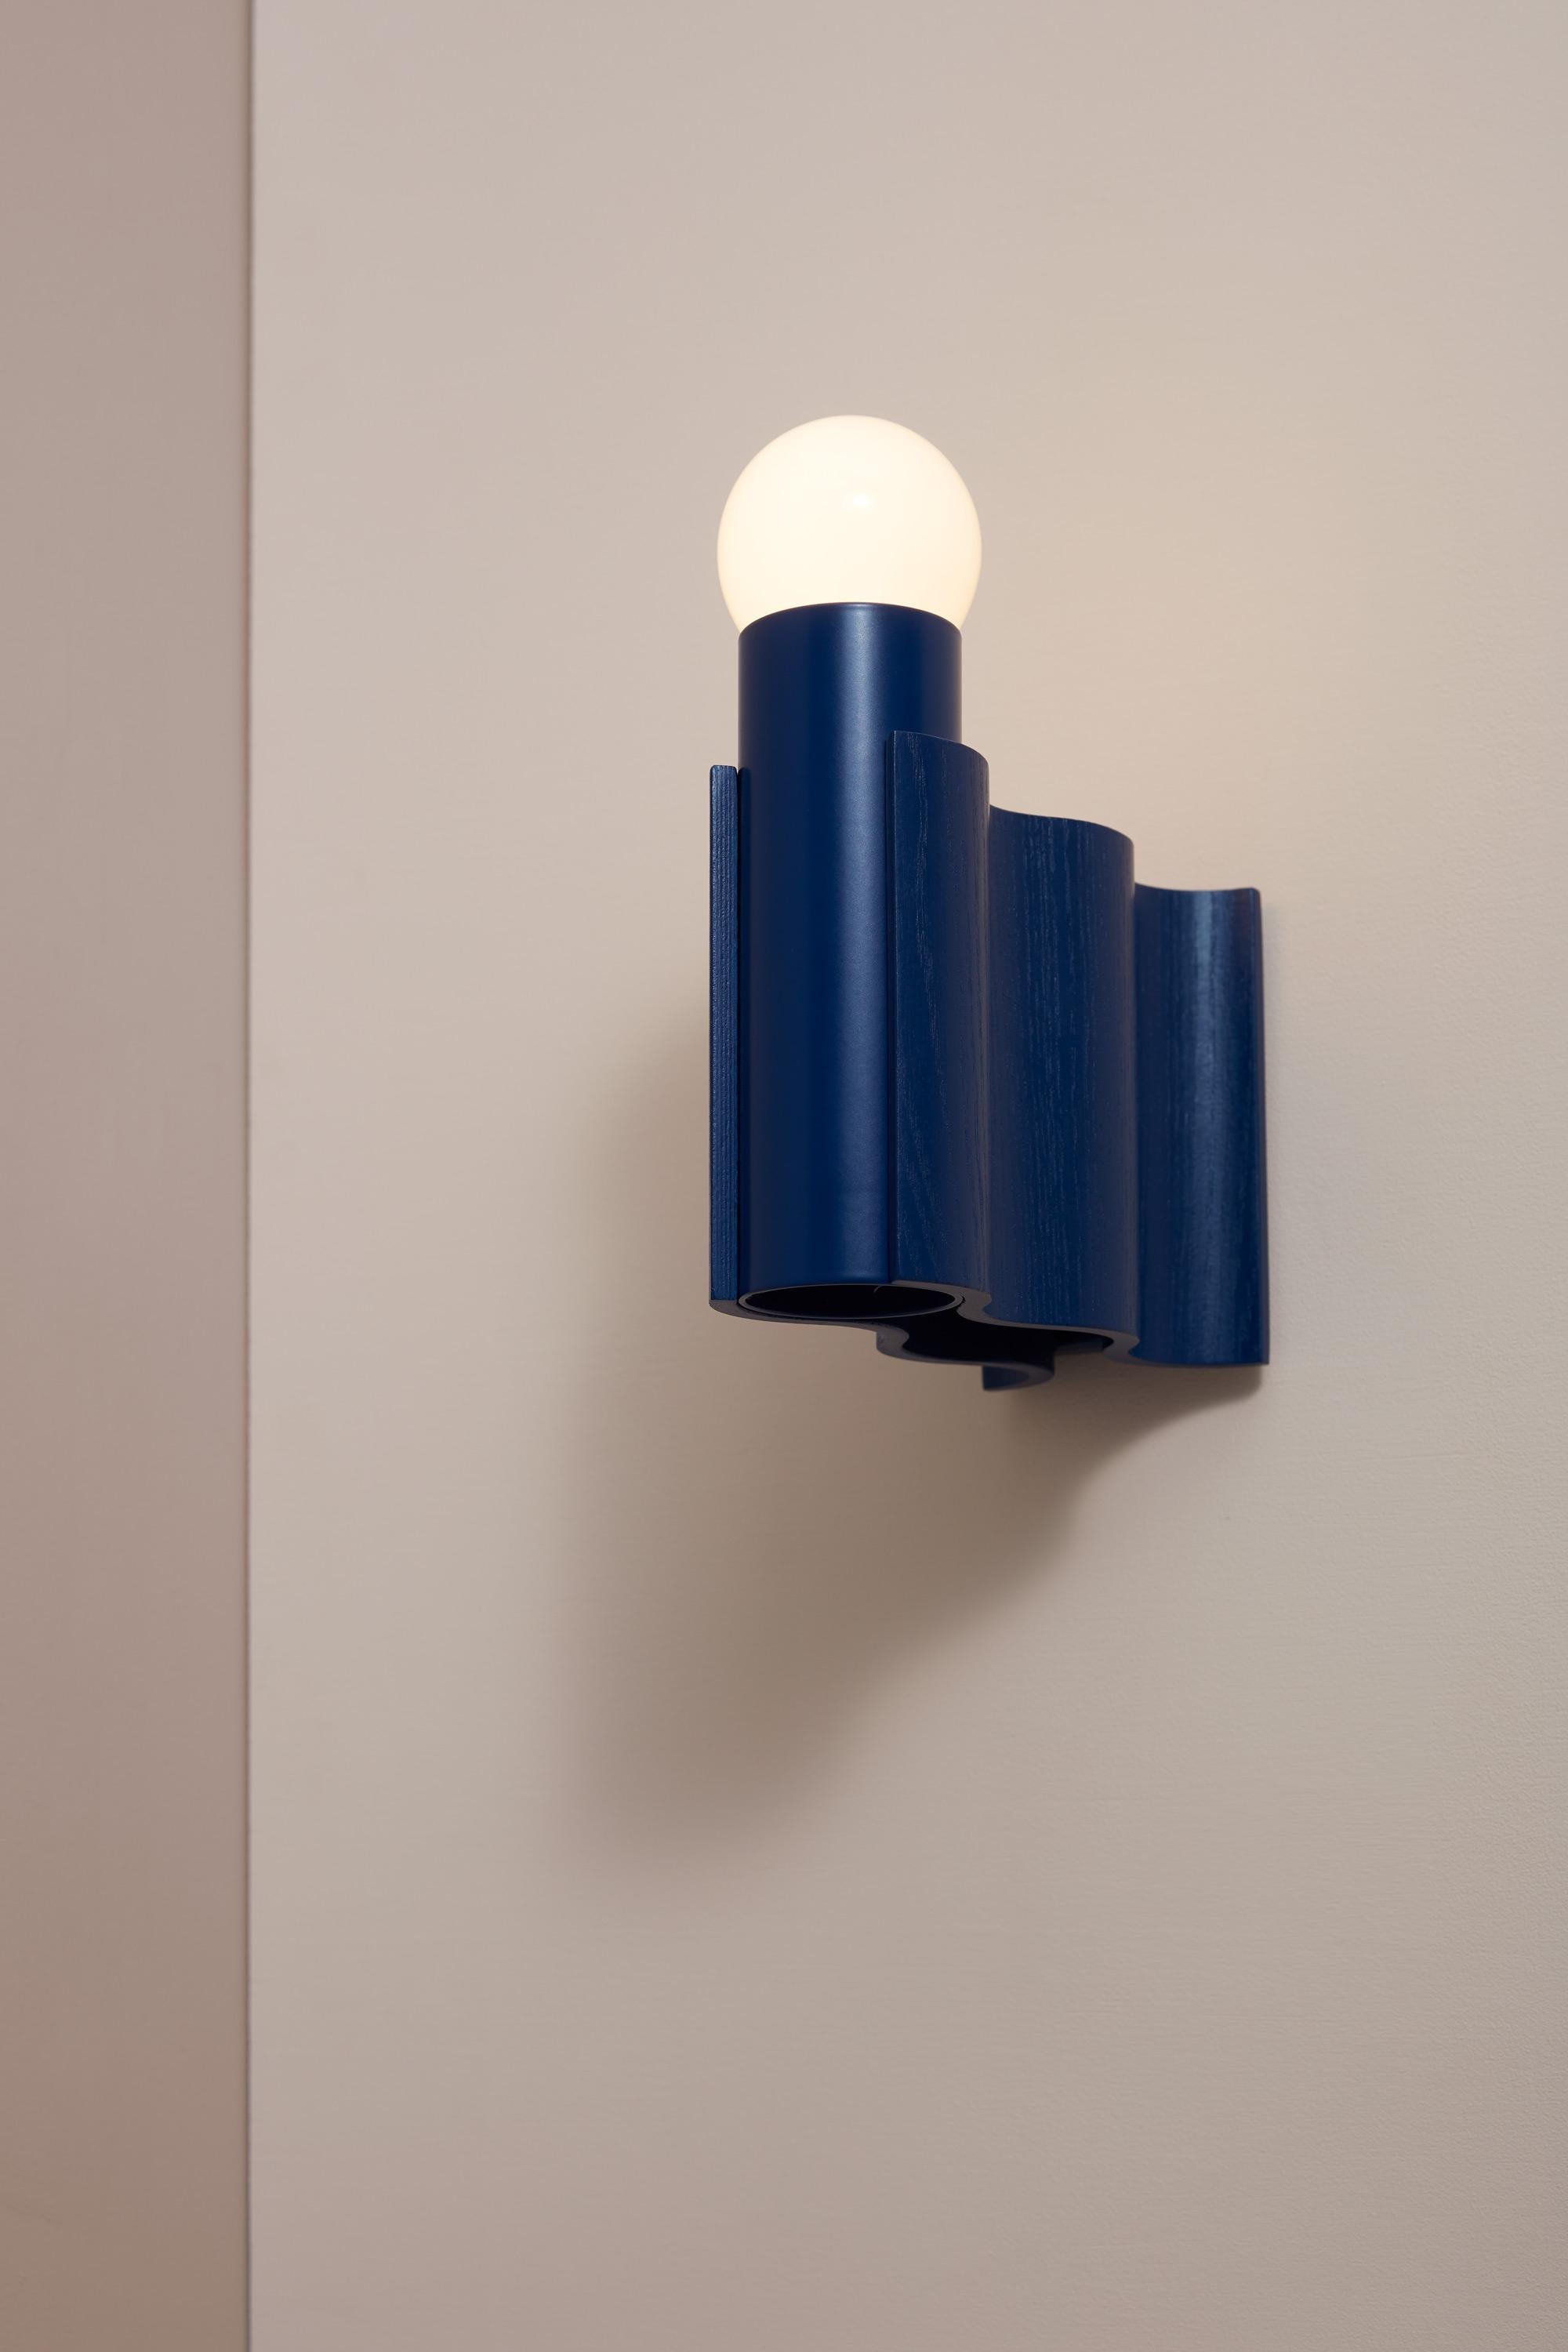 Single Corrugation Sconce / Wall Light in Natural Ash Veneer and Sapphire Blue For Sale 2